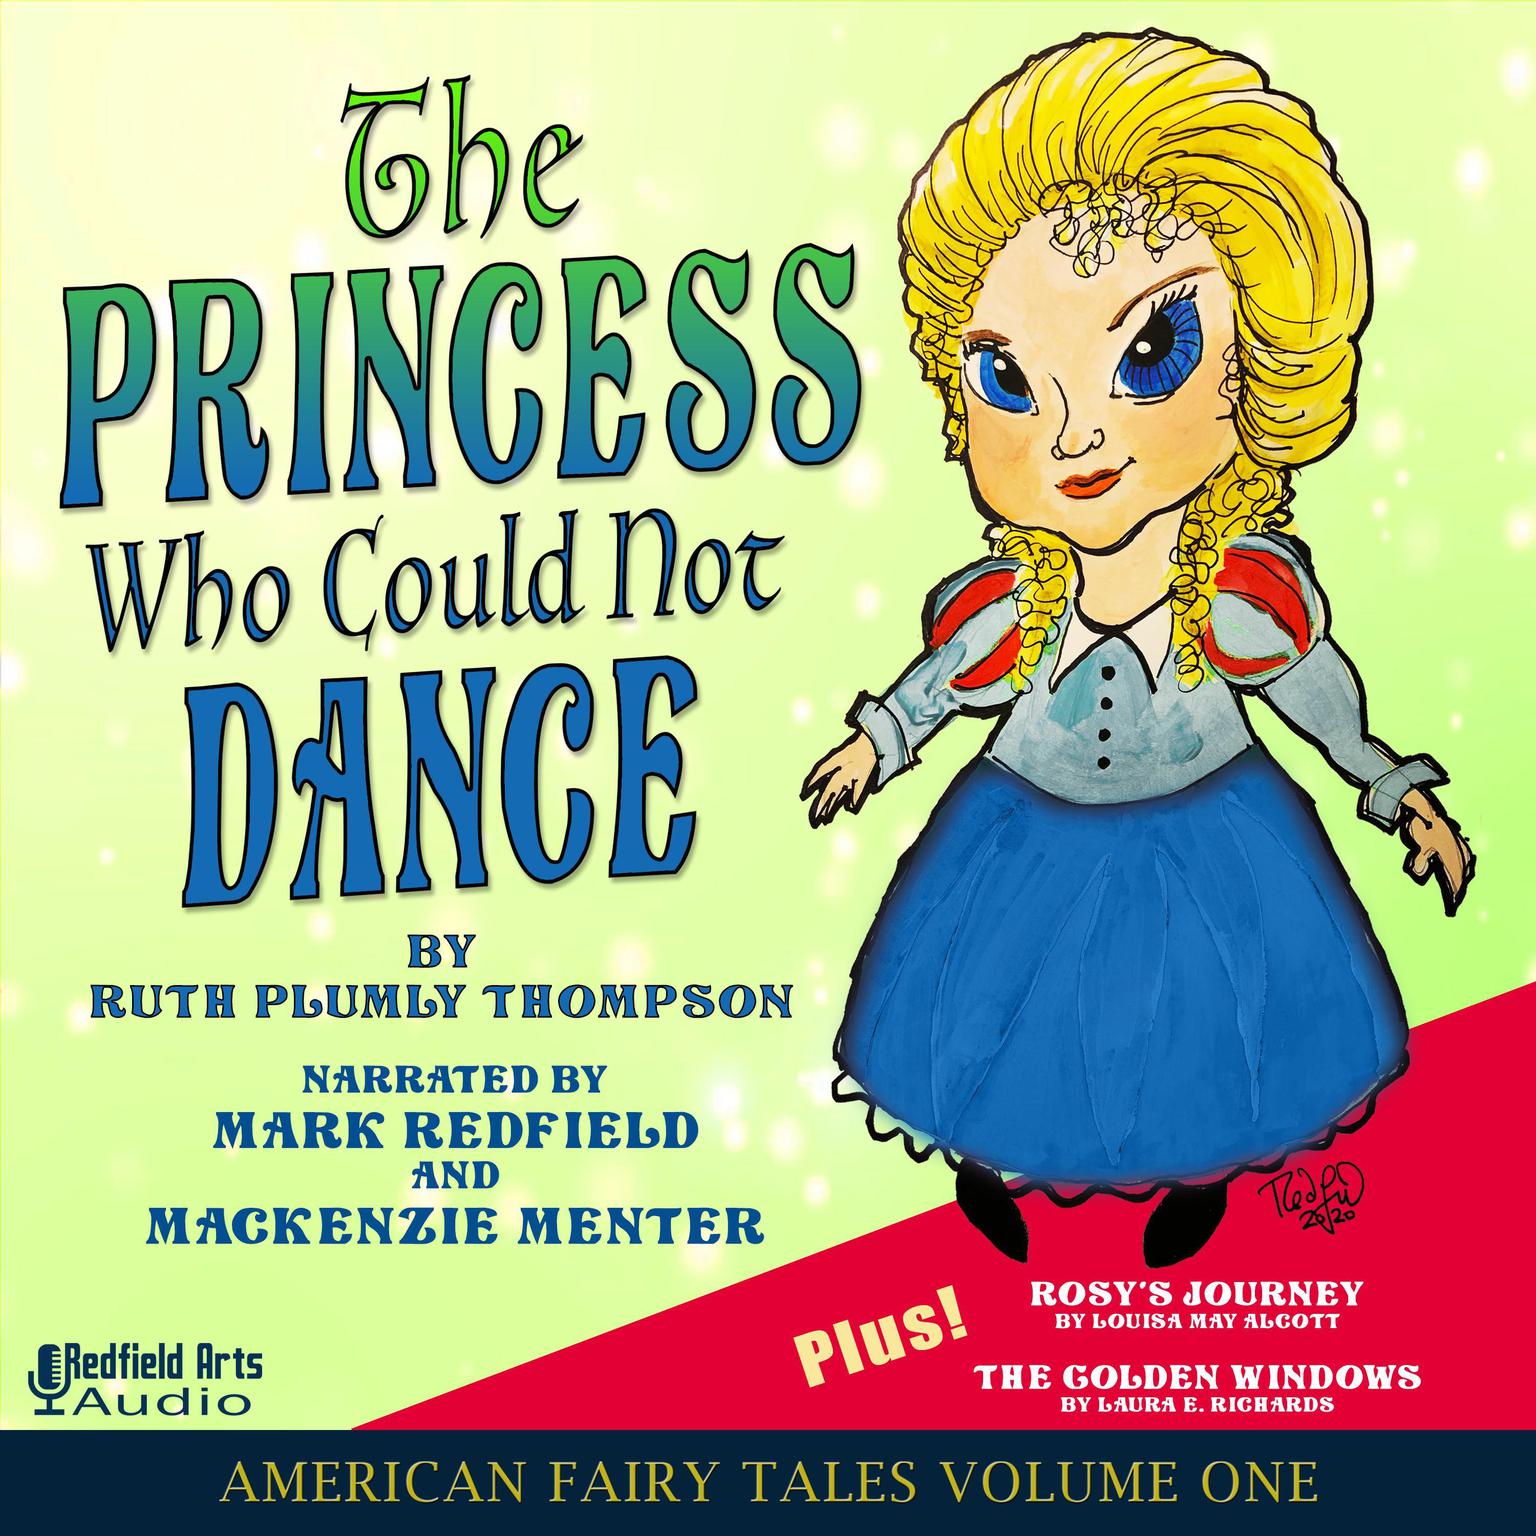 The Princess Who Could Not Dance: Plus: Rosy’s Journey by Louisa May Alcott and The Golden Windows by Laura E. Richards Audiobook, by Laura E. Richards